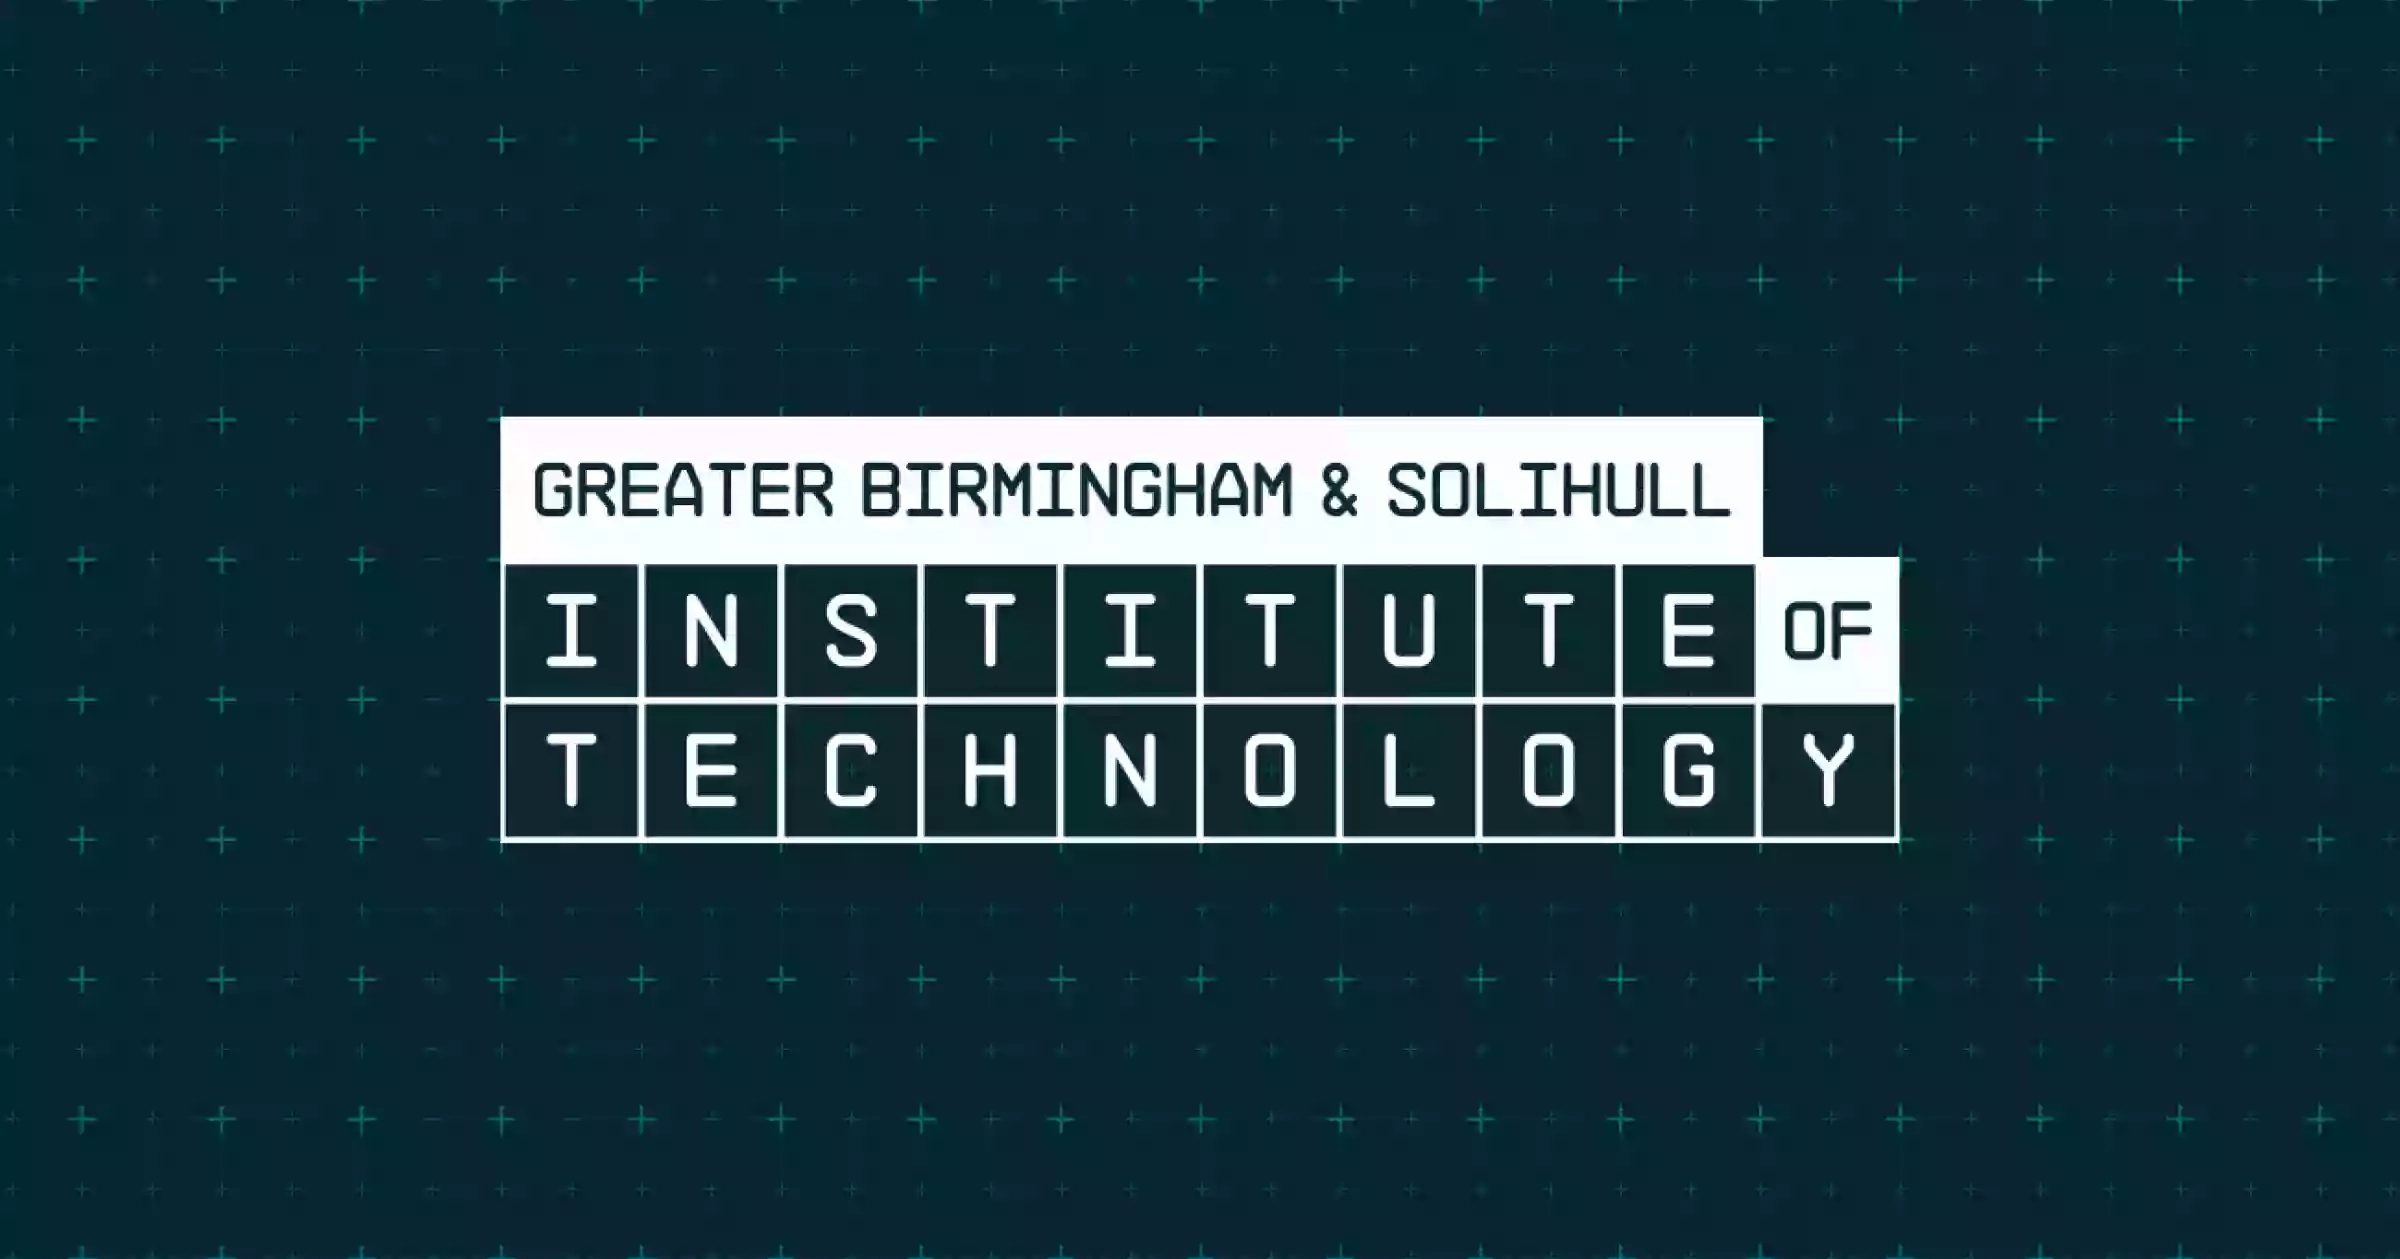 Greater Birmingham & Solihull Institute of Technology